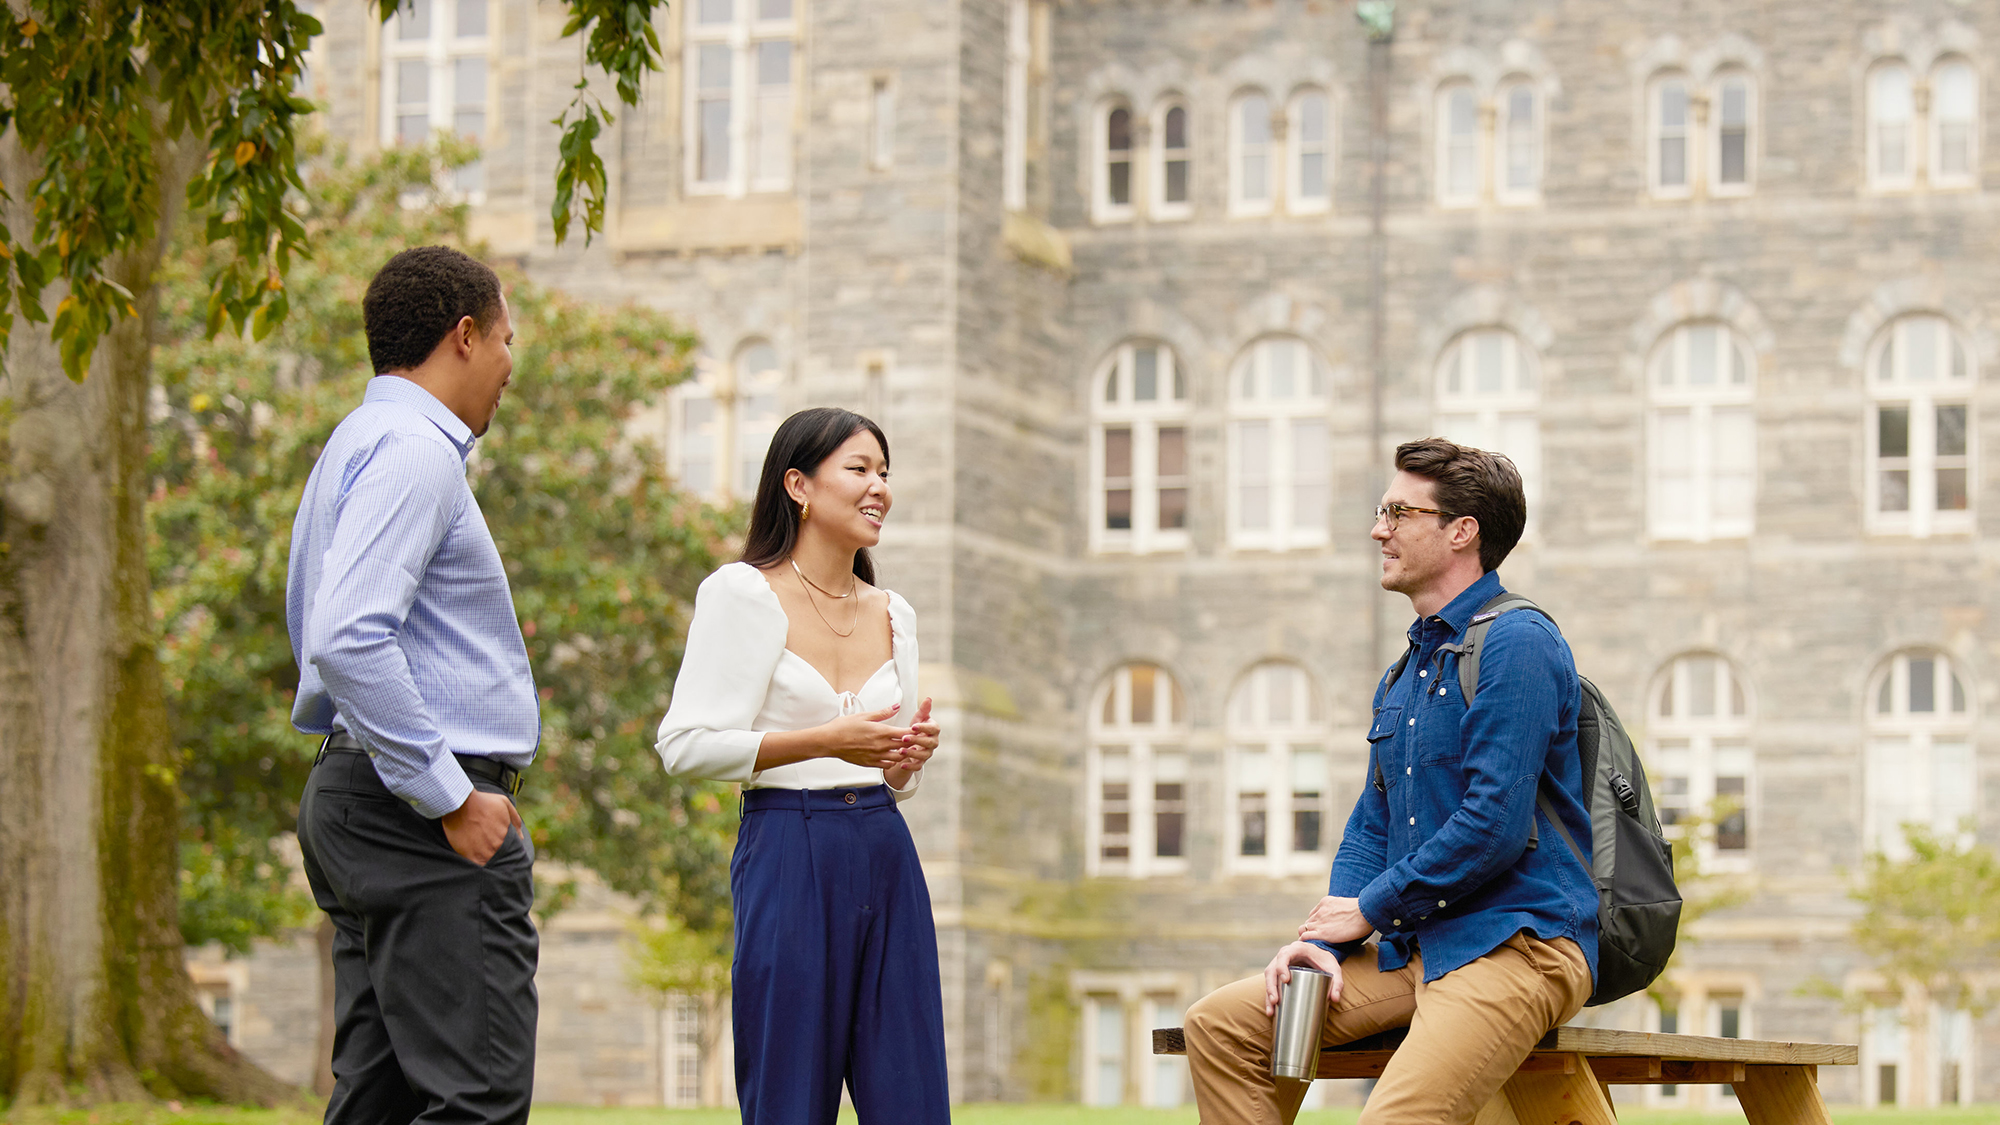 Part time MBA students chatting on Healy lawn on Georgetown University's Campus